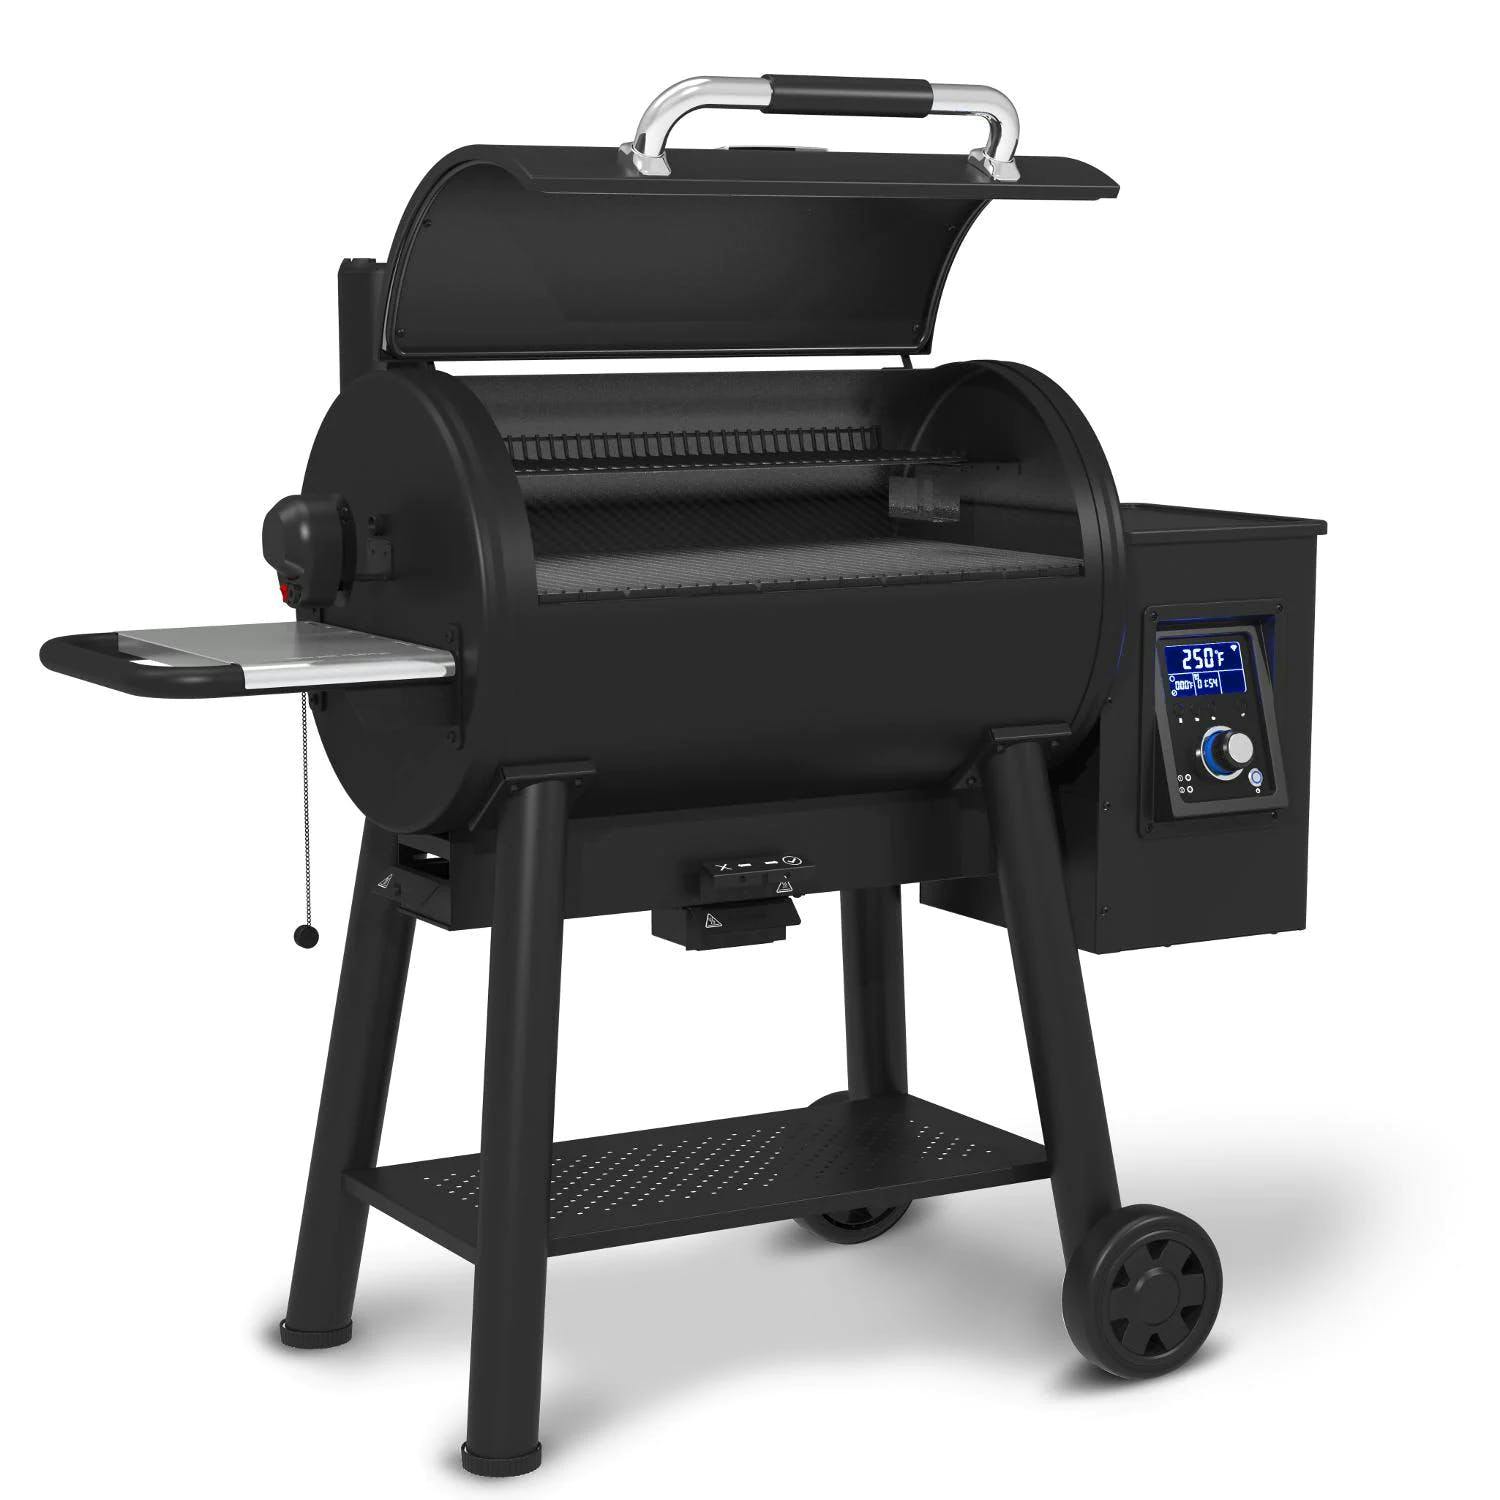 Broil King Regal Wi-Fi & Bluetooth Controlled Pellet Grill